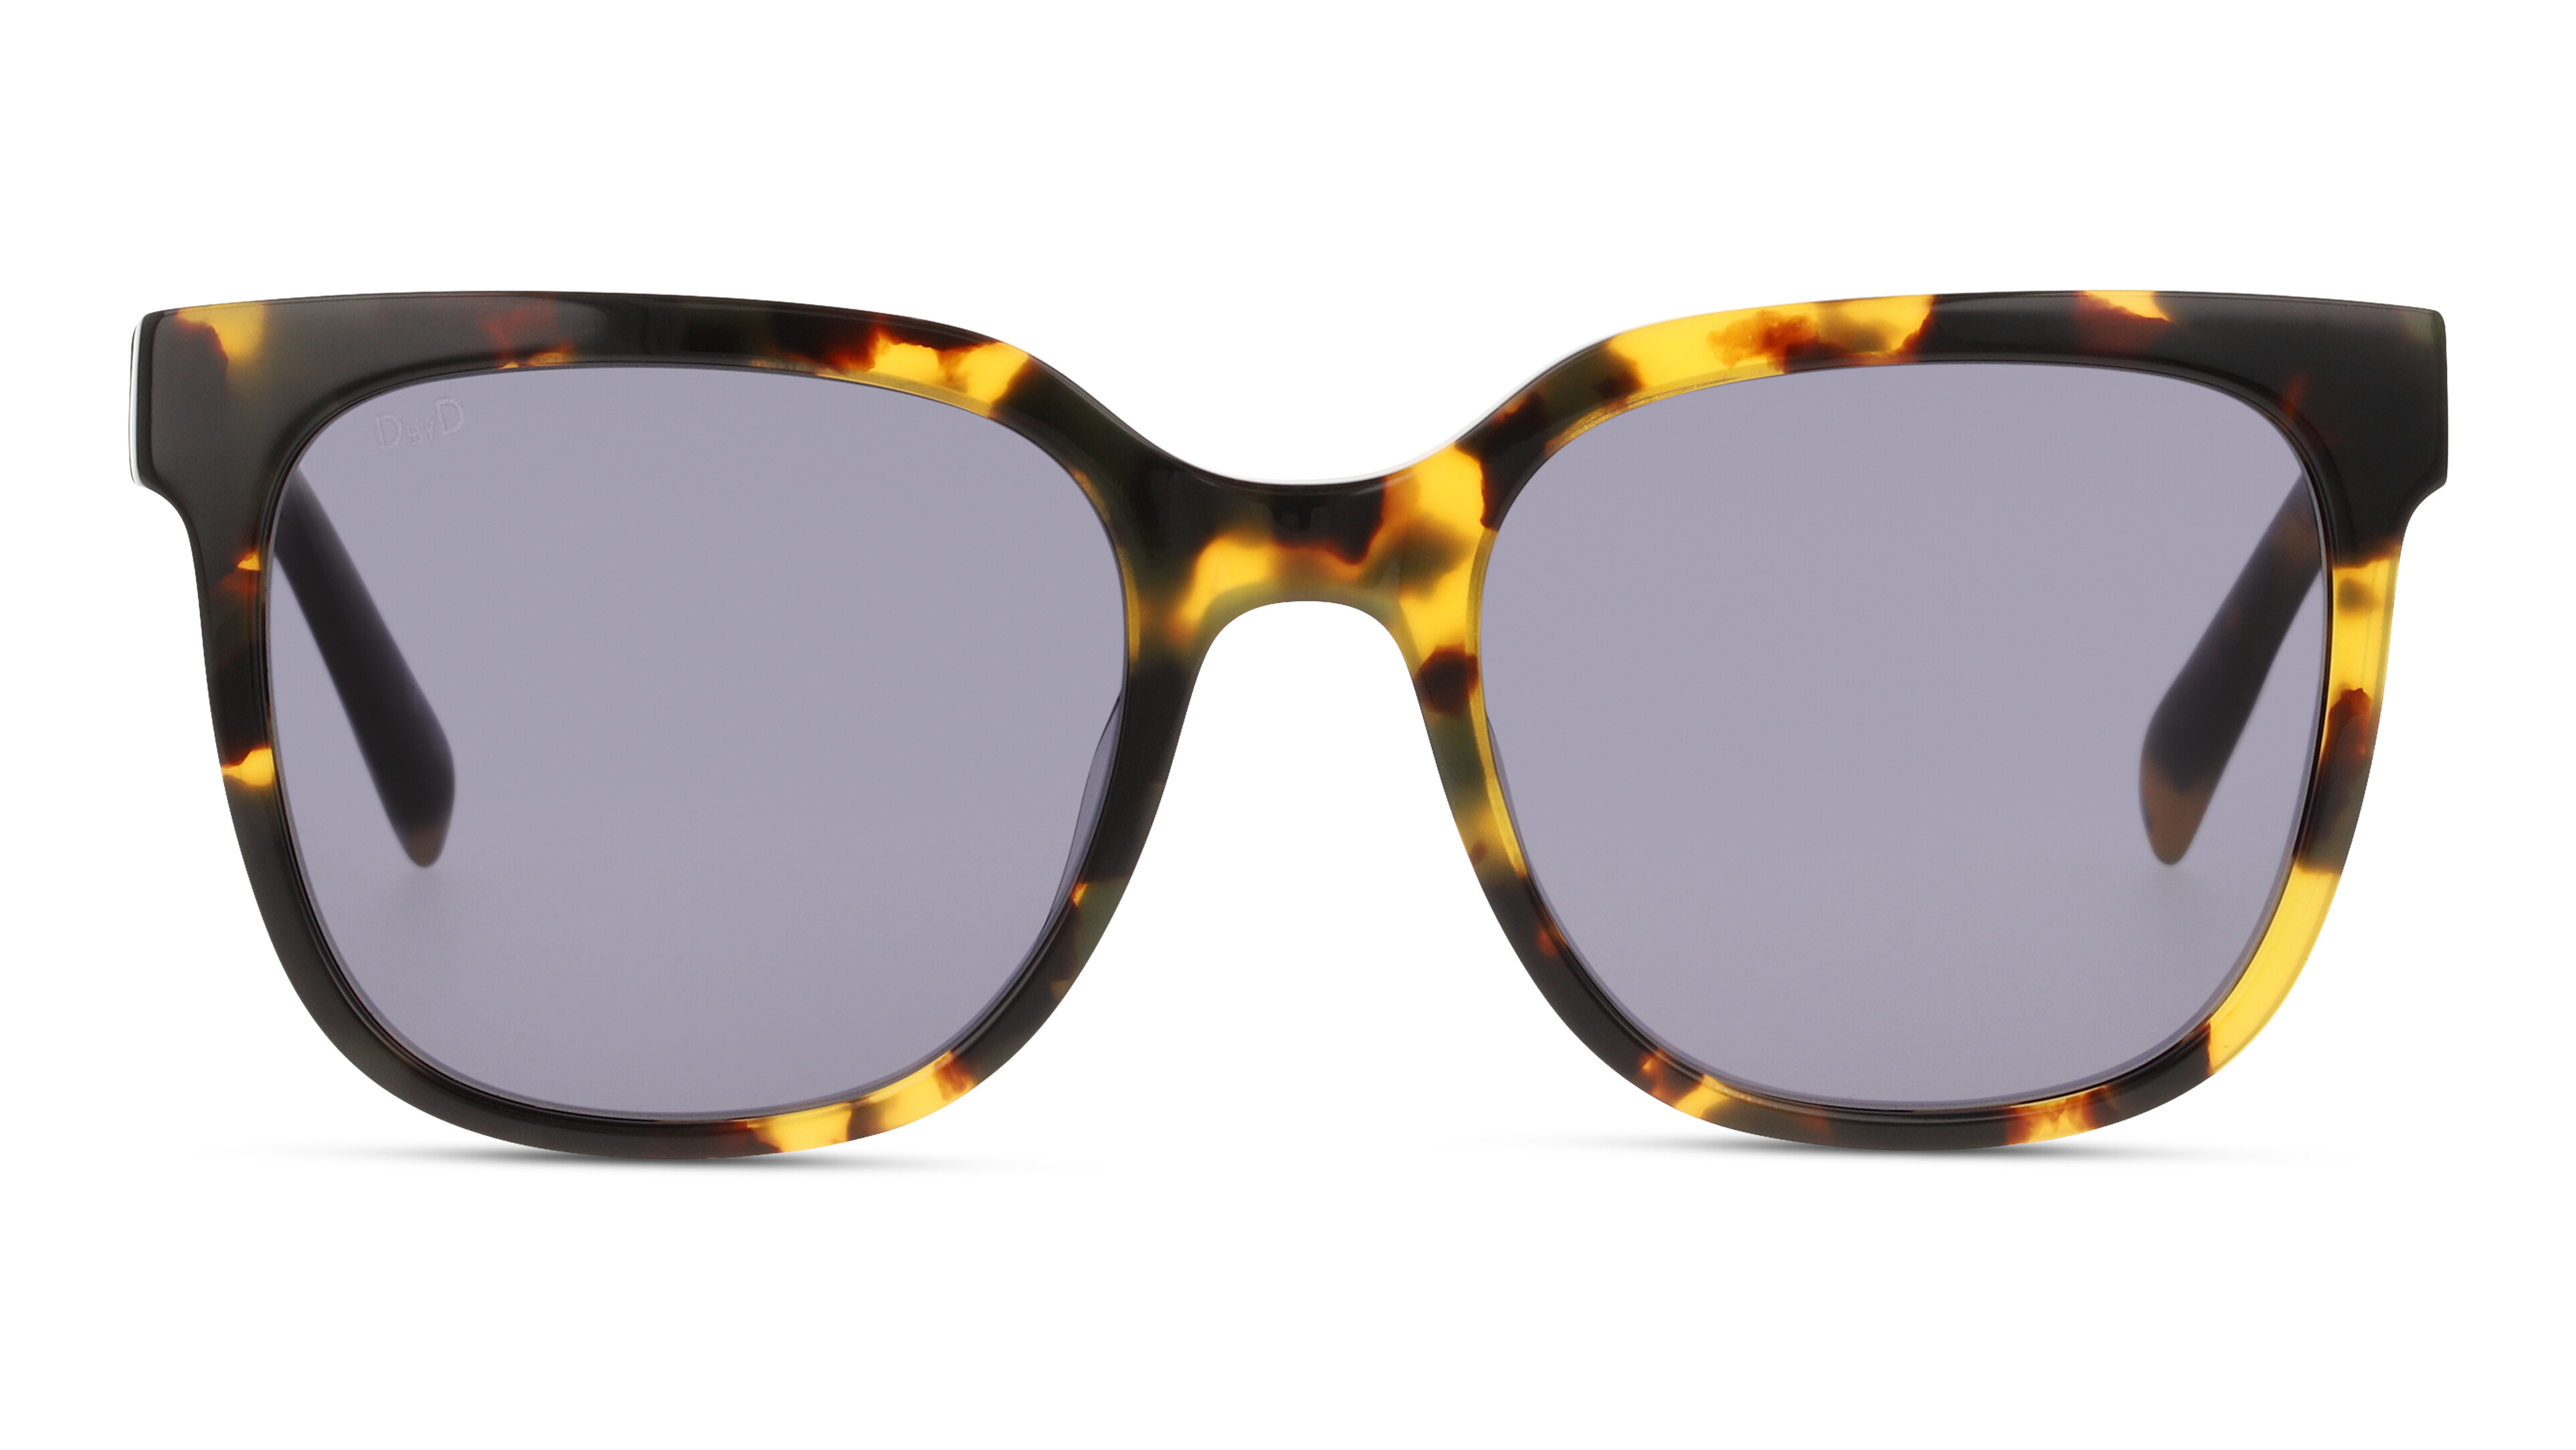 [products.image.front] DbyD DBSF5009 HHC0 Sonnenbrille